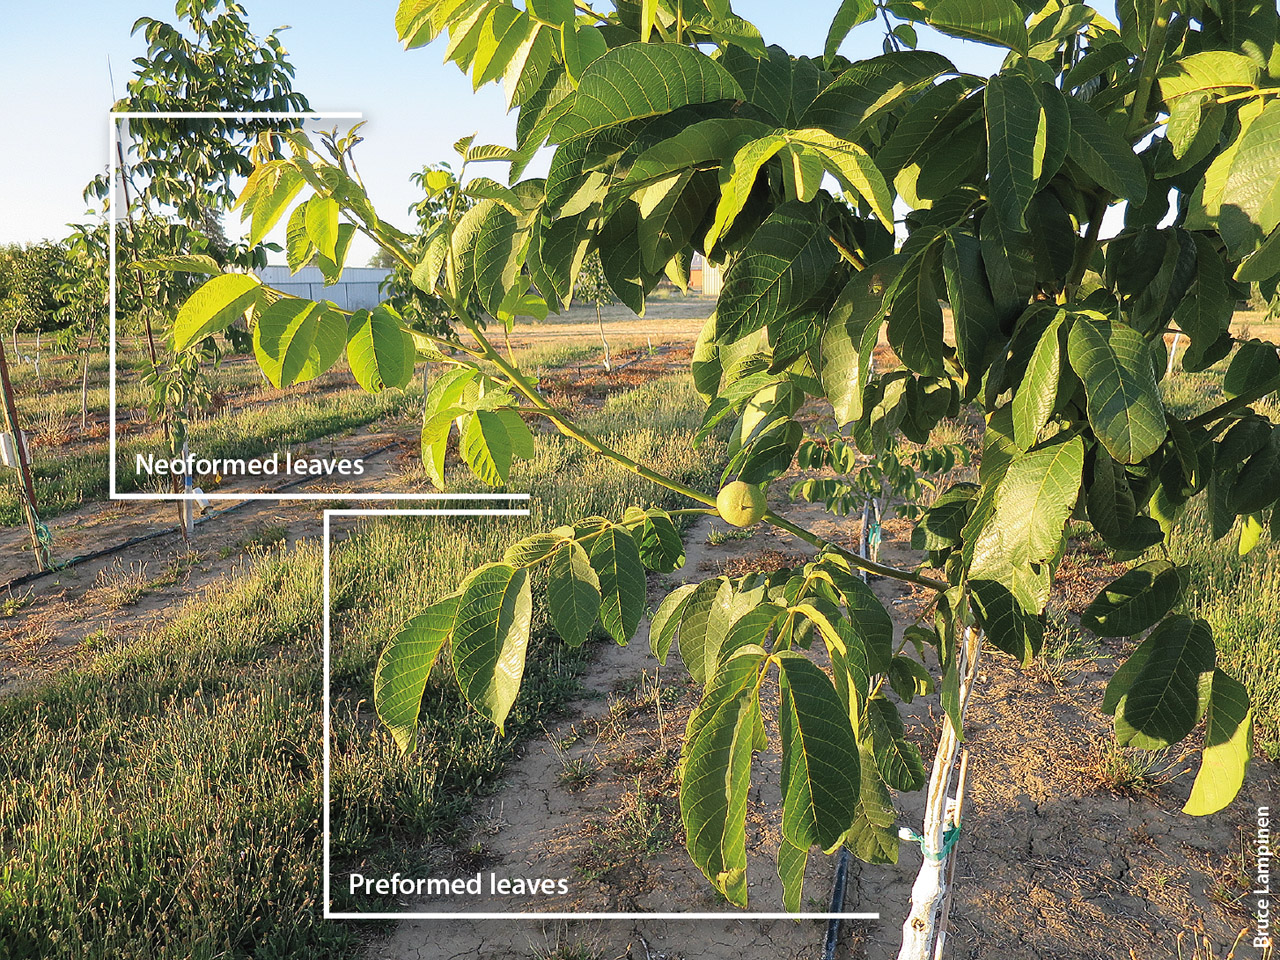 Canopy growth in young walnut trees is bimodal: Preformed growth forms in the bud during the previous season, and neoformed growth forms during the current season.